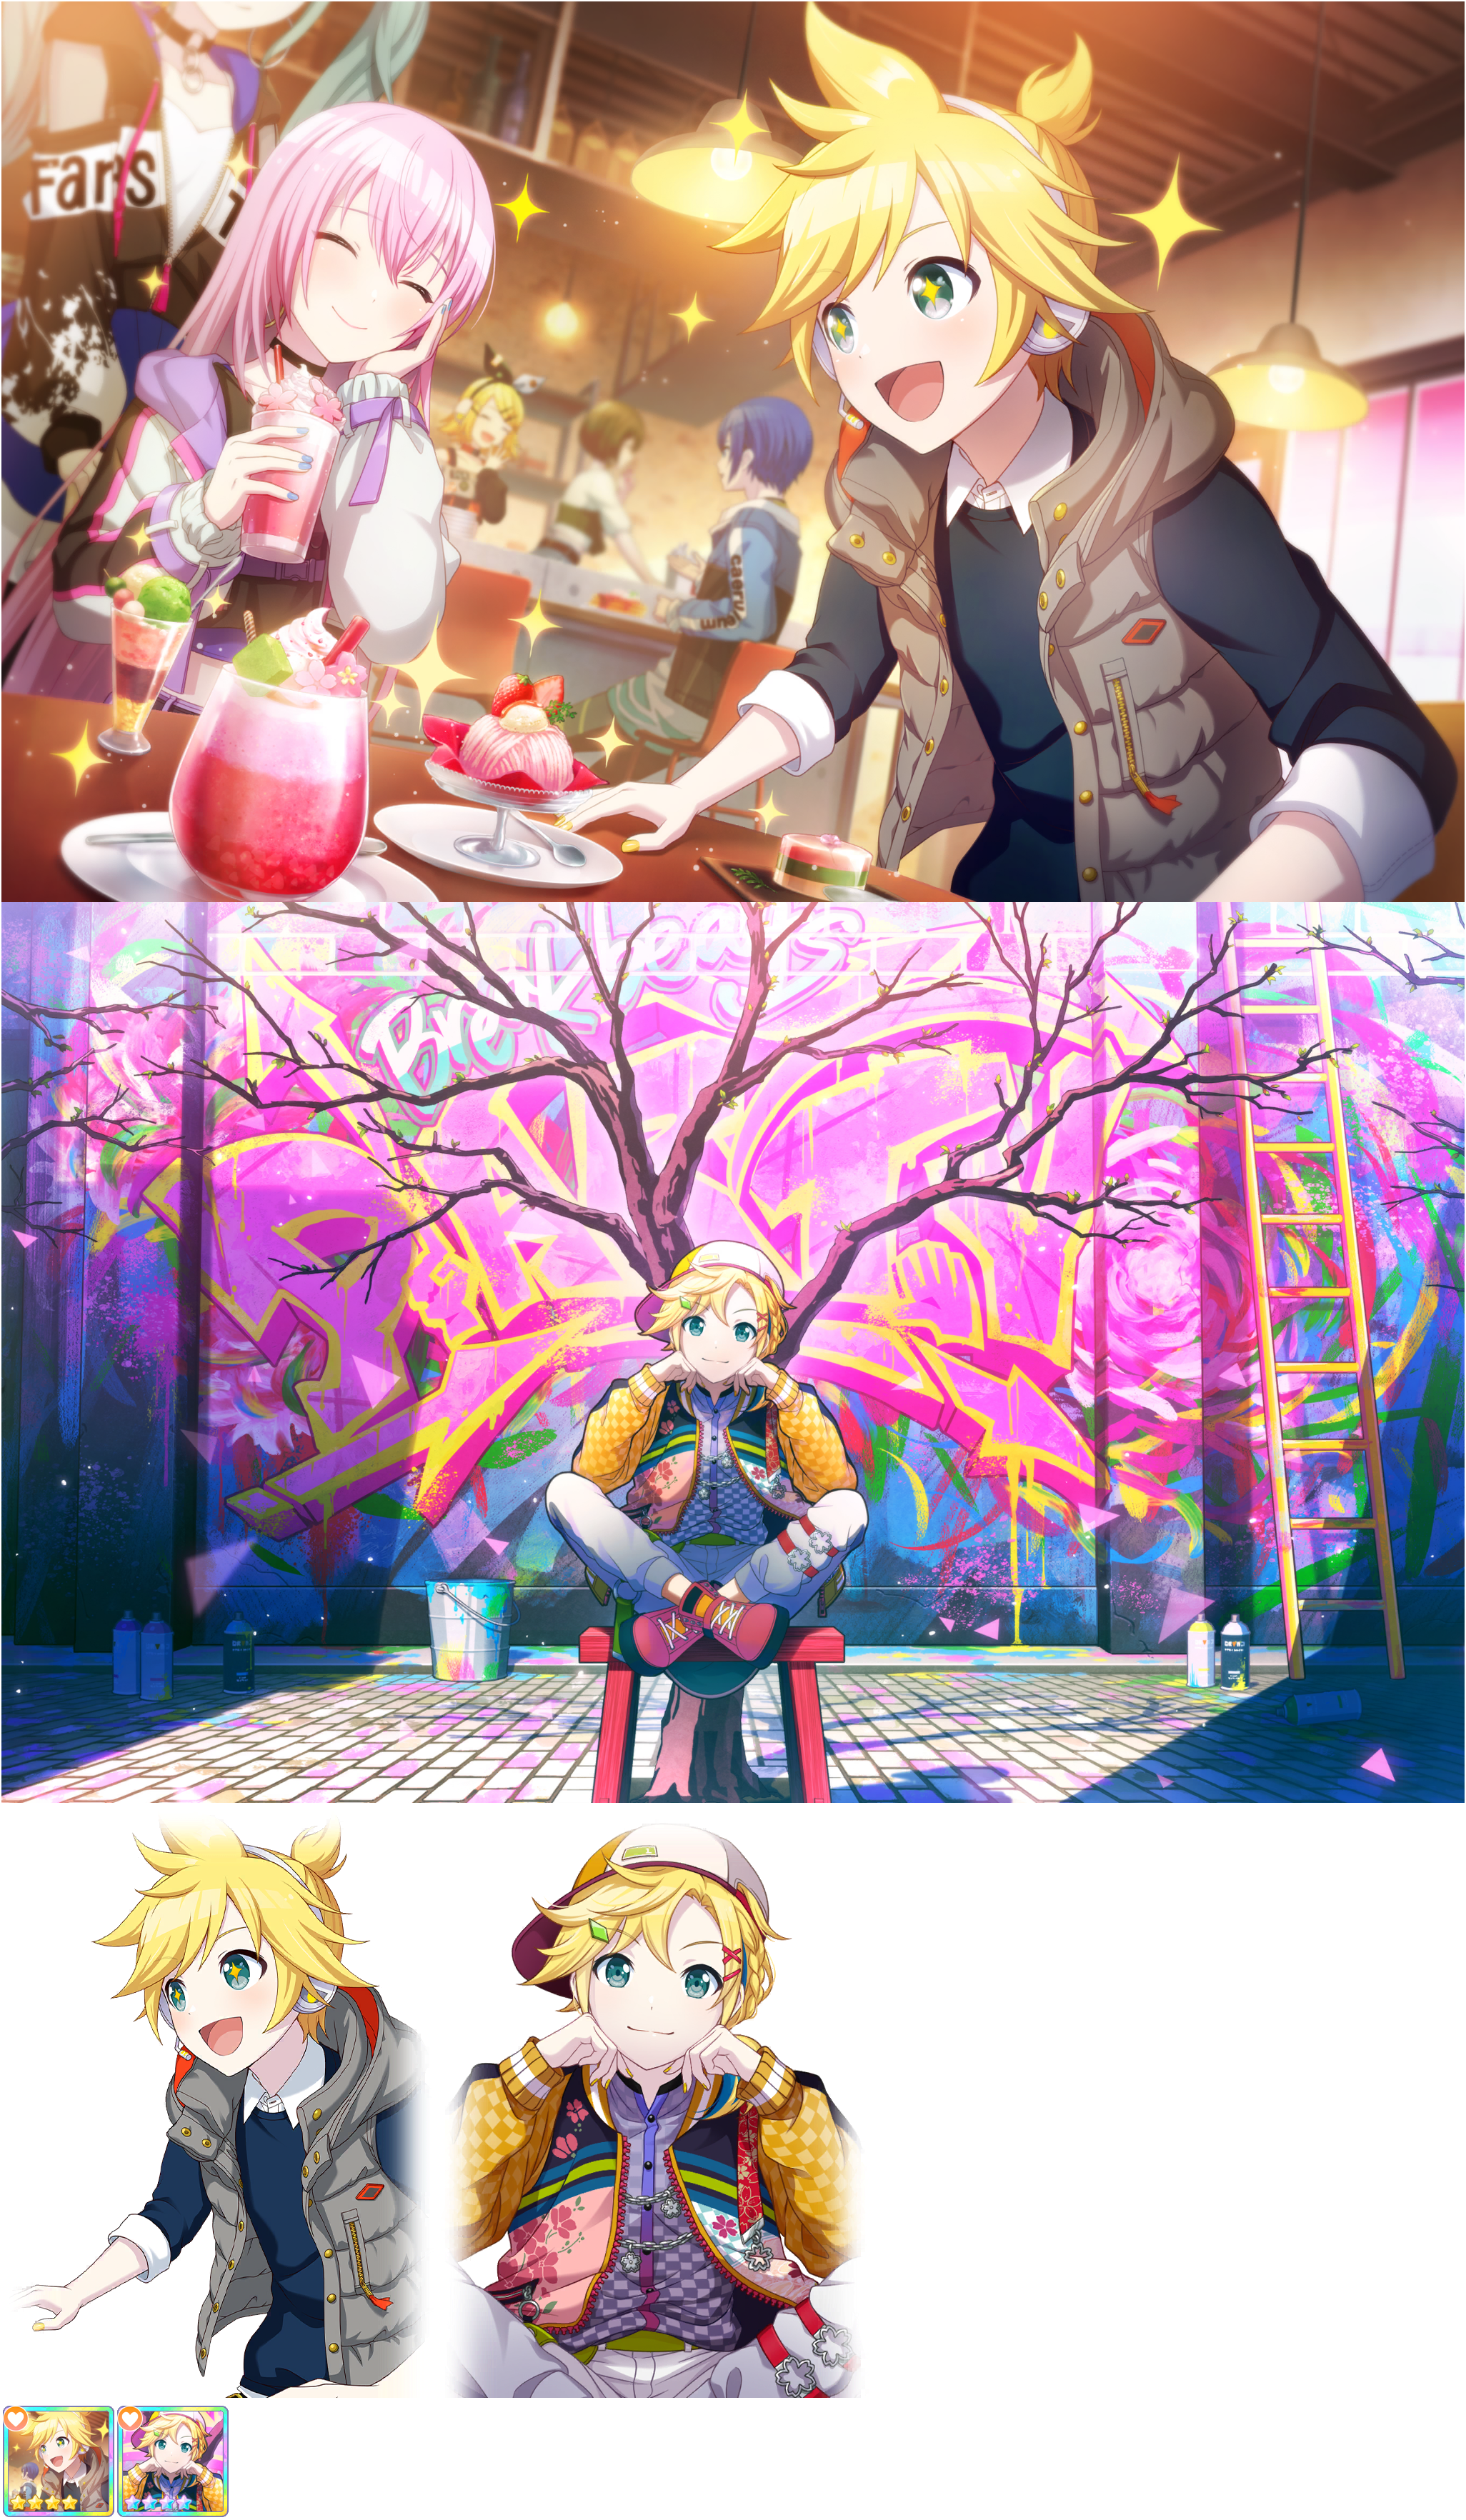 Surrounded by Spring-Colored Sweets